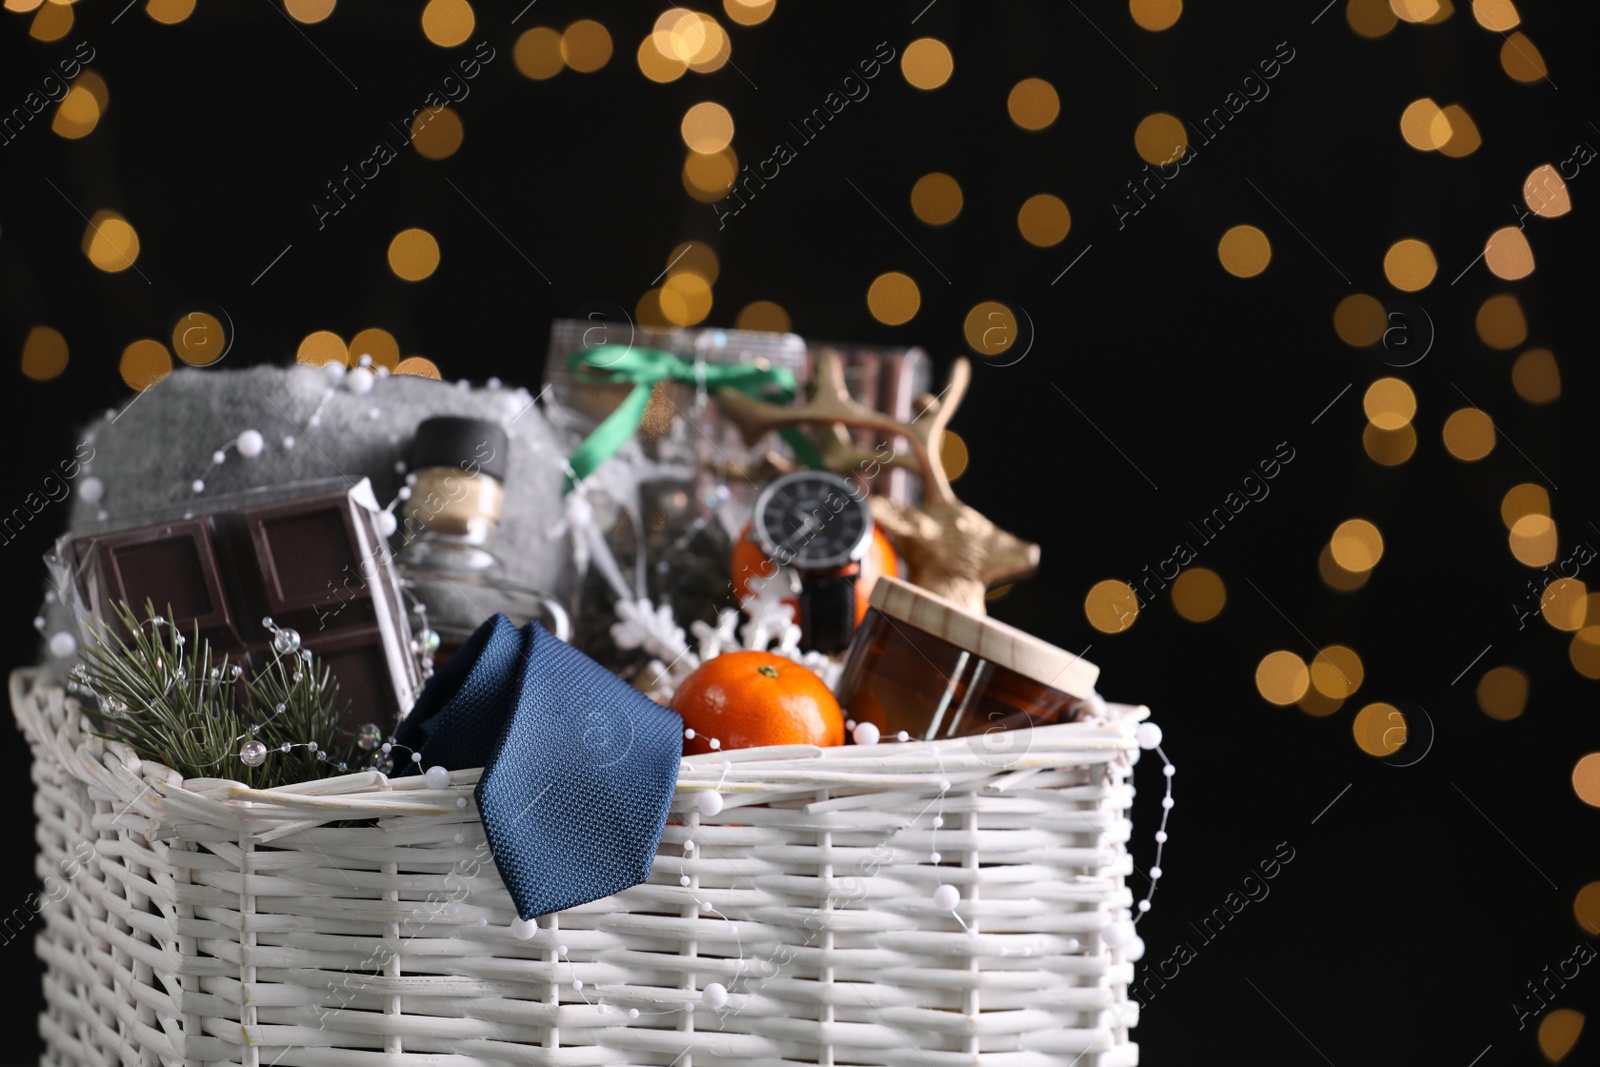 Photo of Wicker basket with Christmas gift set on black background against festive lights